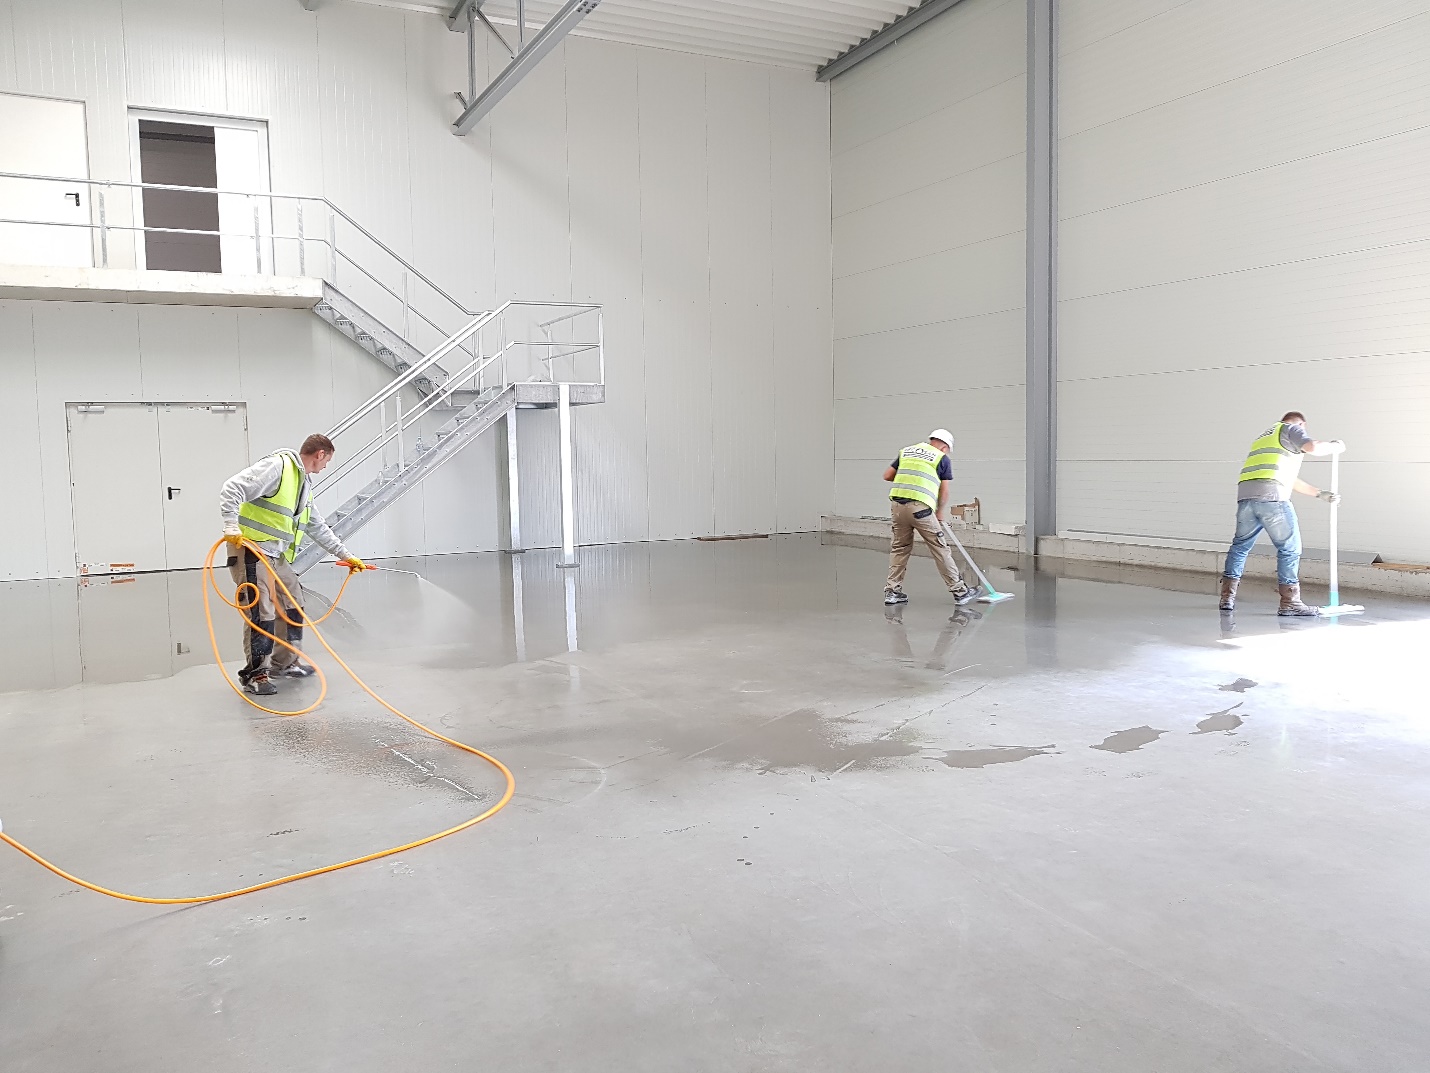  Preparing to Grind and Polish a Concrete Floor